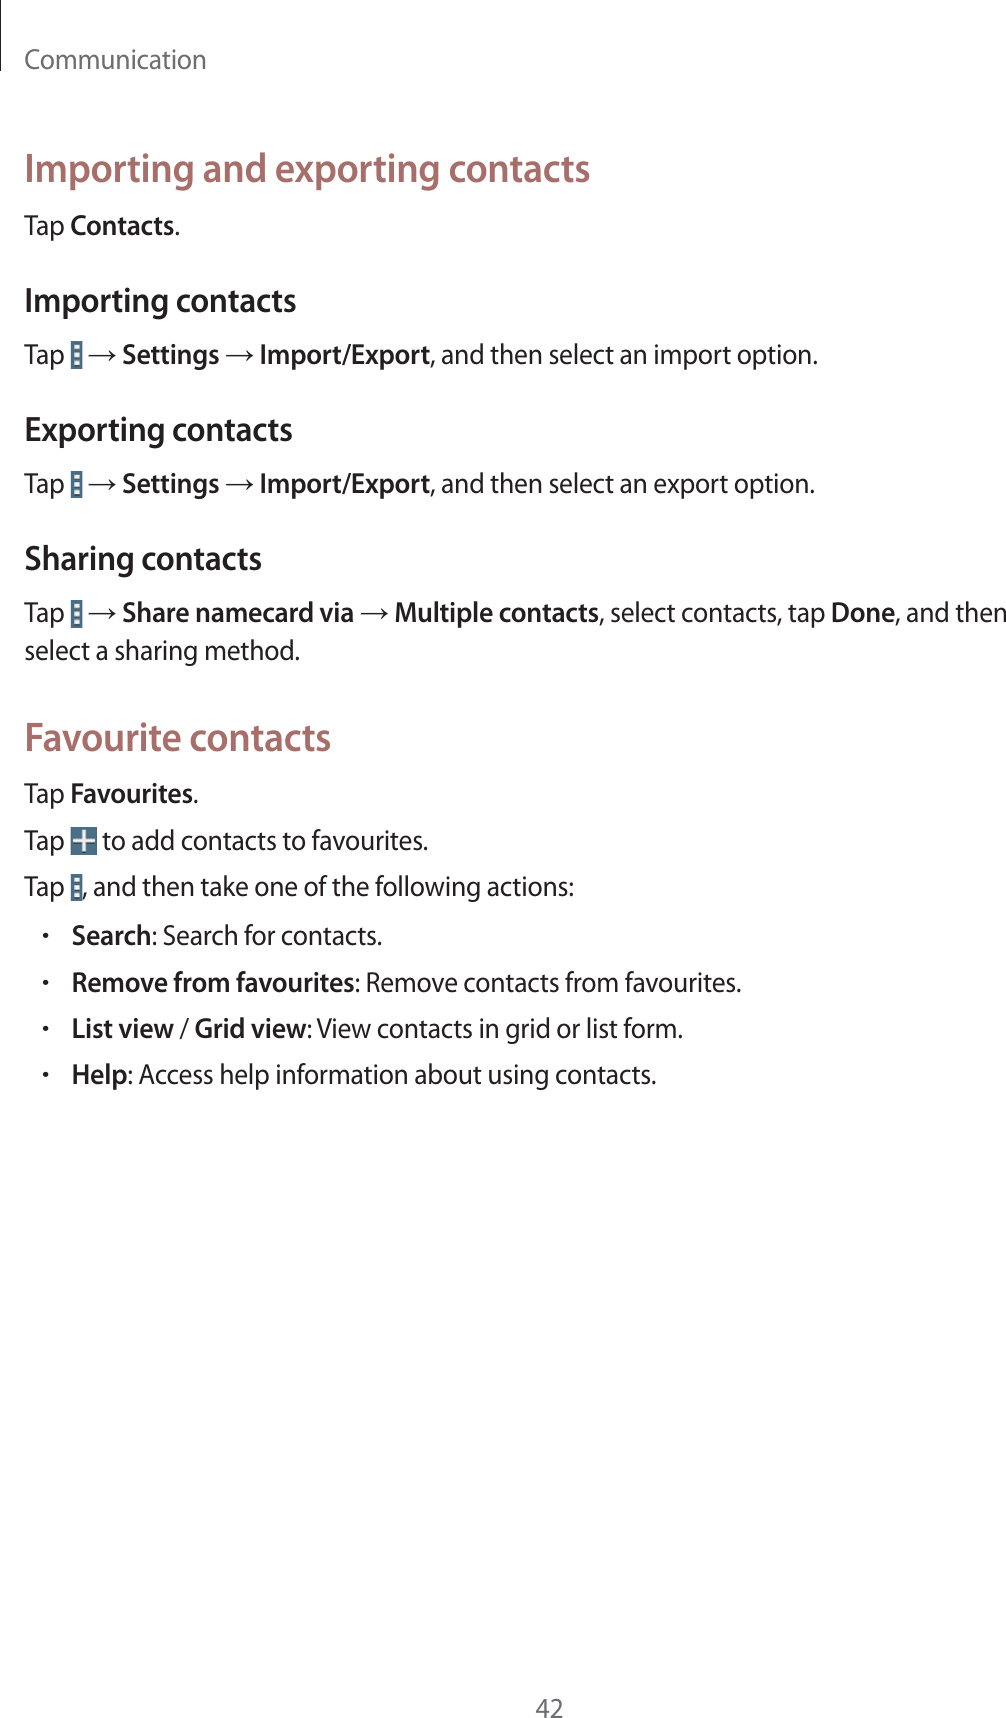 Communication42Importing and exporting contactsTap Contacts.Importing contactsTap   ĺ Settings ĺ Import/Export, and then select an import option.Exporting contactsTap   ĺ Settings ĺ Import/Export, and then select an export option.Sharing contactsTap   ĺ Share namecard via ĺ Multiple contacts, select contacts, tap Done, and then select a sharing method.Favourite contactsTap Favourites.Tap   to add contacts to favourites.Tap  , and then take one of the following actions:rSearch: Search for contacts.rRemove from favourites: Remove contacts from favourites.rList view / Grid view: View contacts in grid or list form.rHelp: Access help information about using contacts.